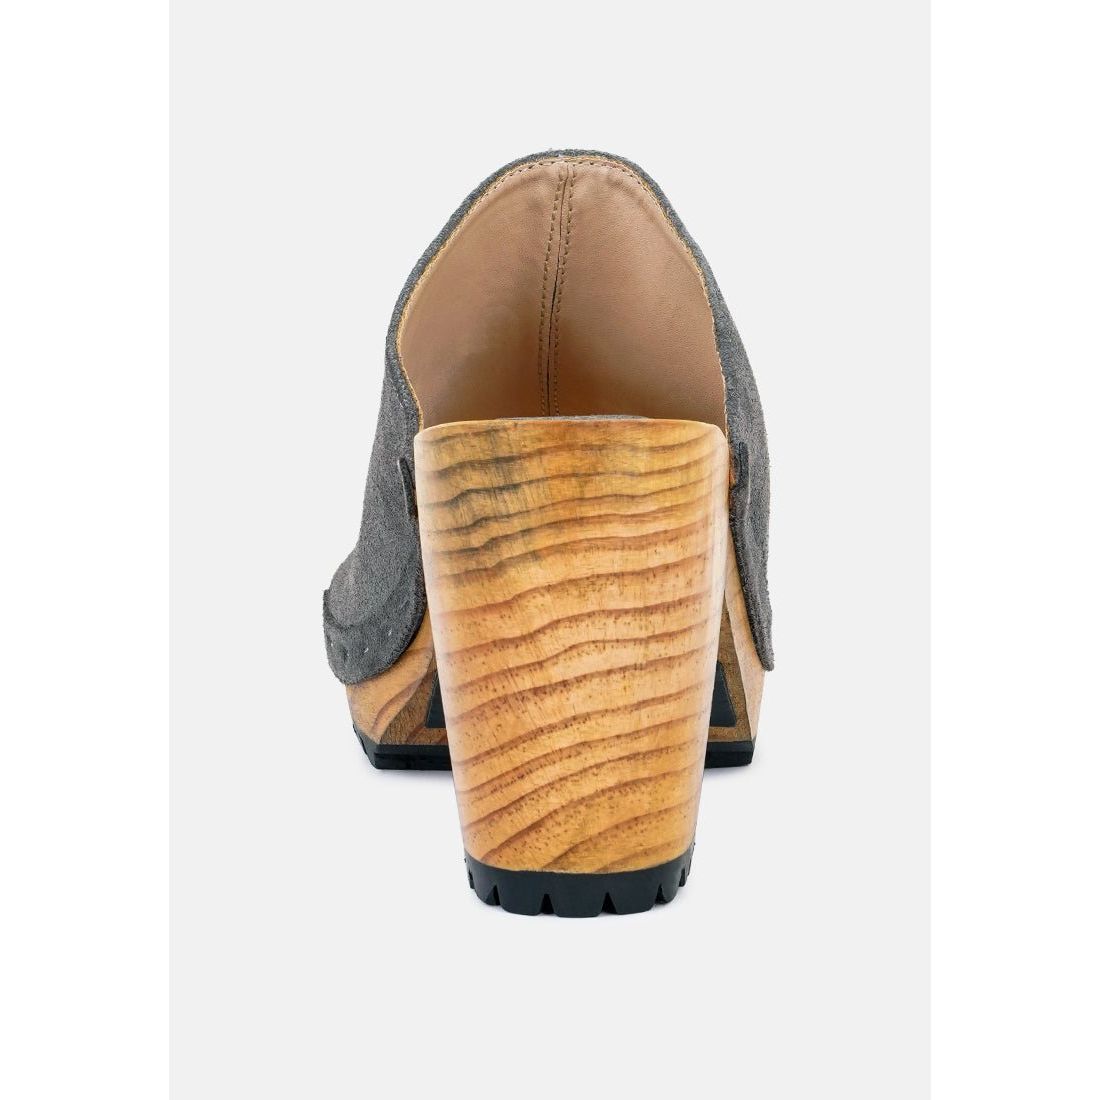 Jarrah Suede Slide Clogs For Women Stylish Block Heeled Leather Shoes - KME means the very best